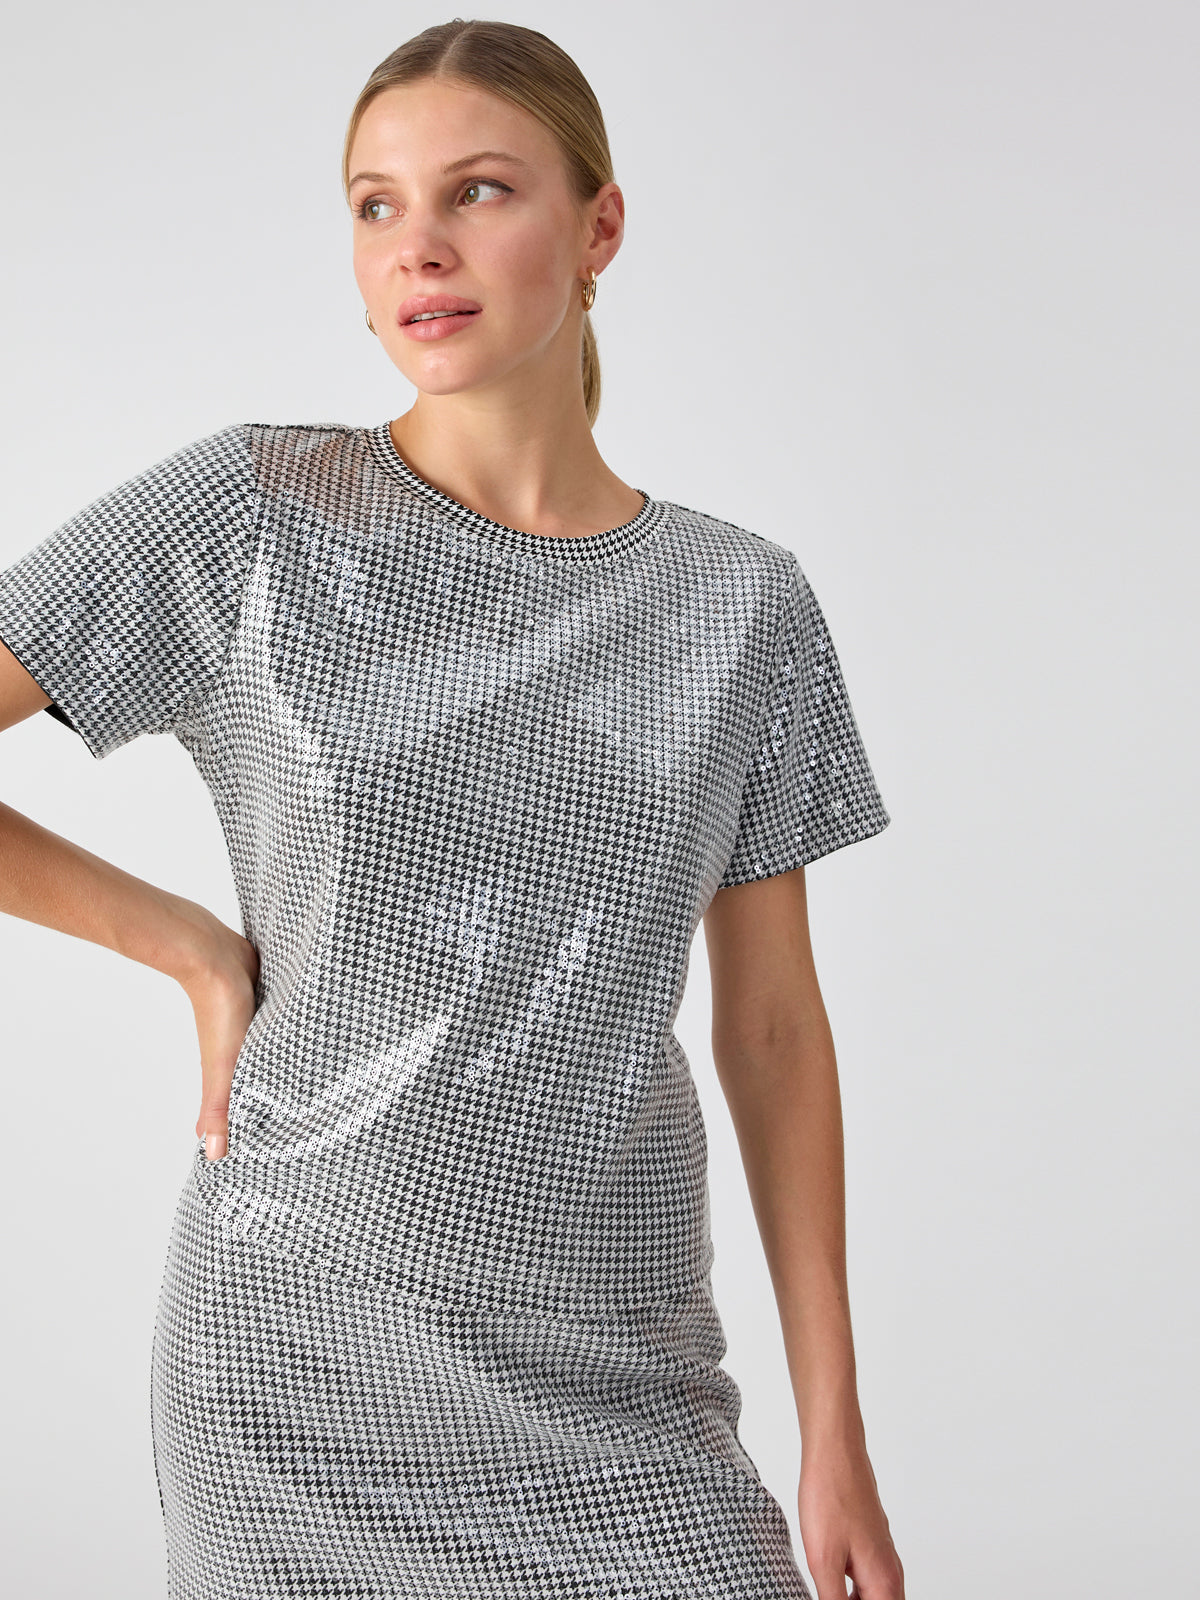 Upscale Houndstooth Sequin Top – Connected Hearts Boutique